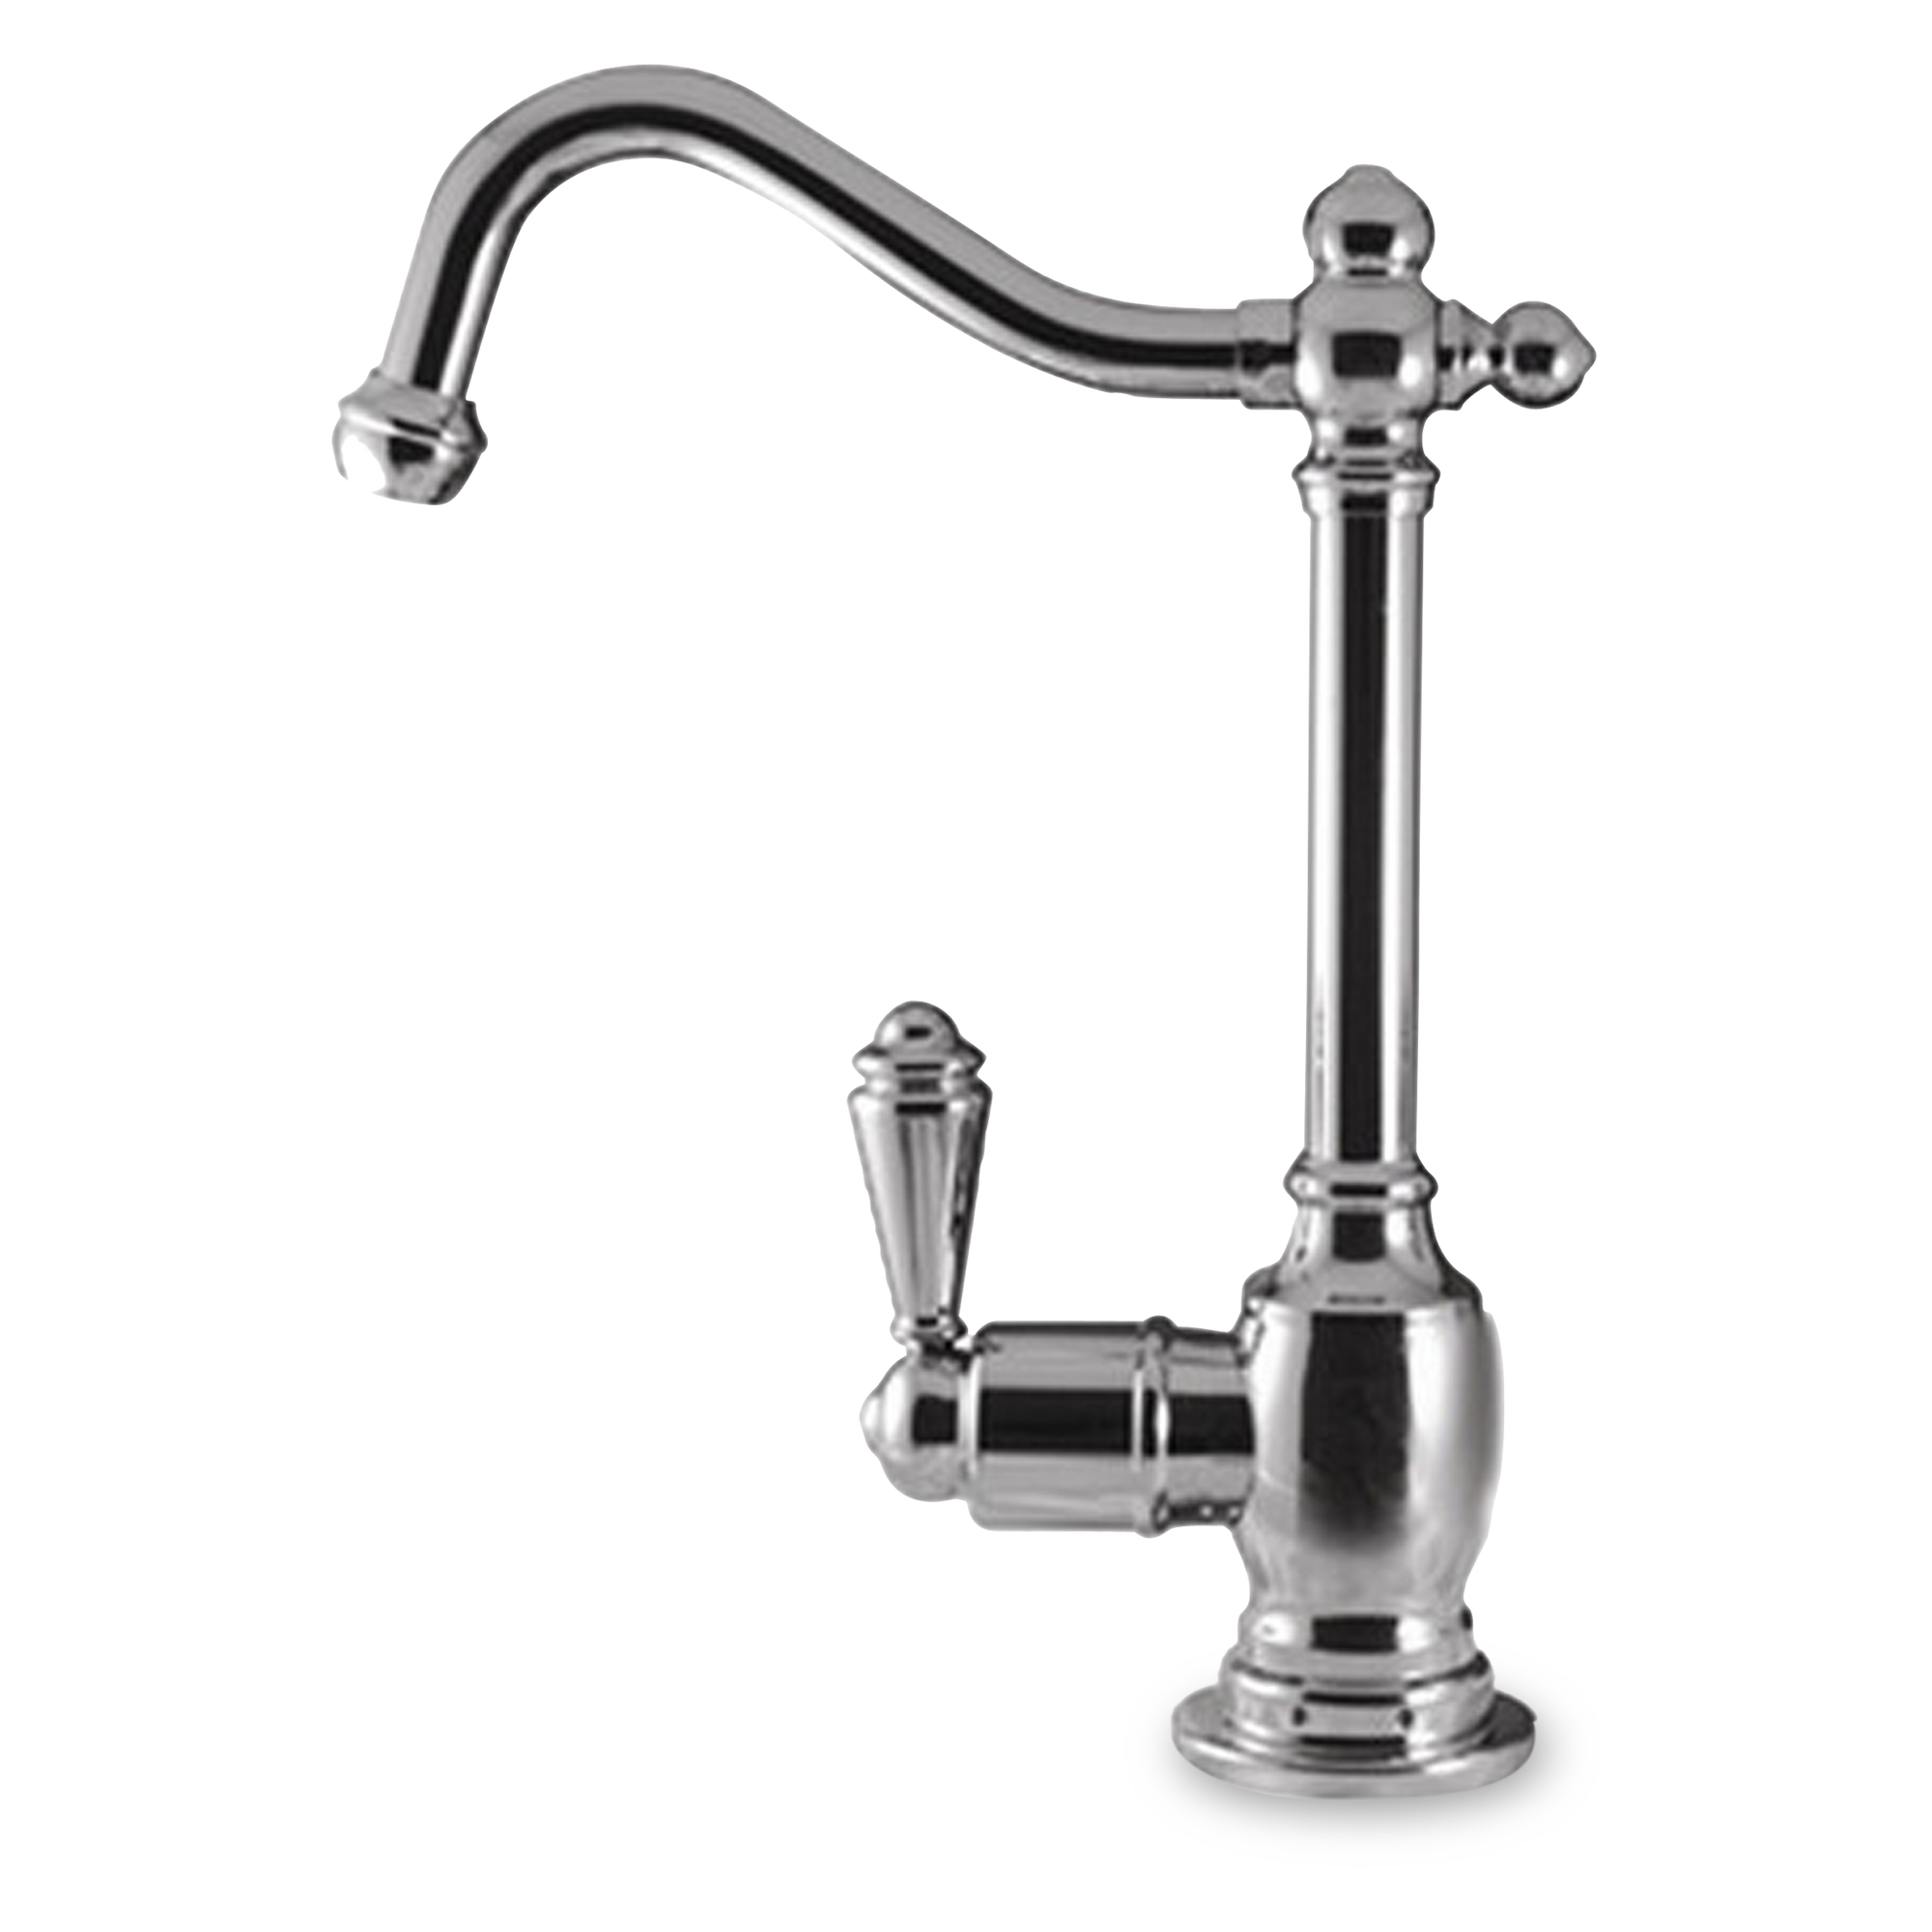 The Victorian instant hot water faucet brings a rustic elegance to any kitchen.